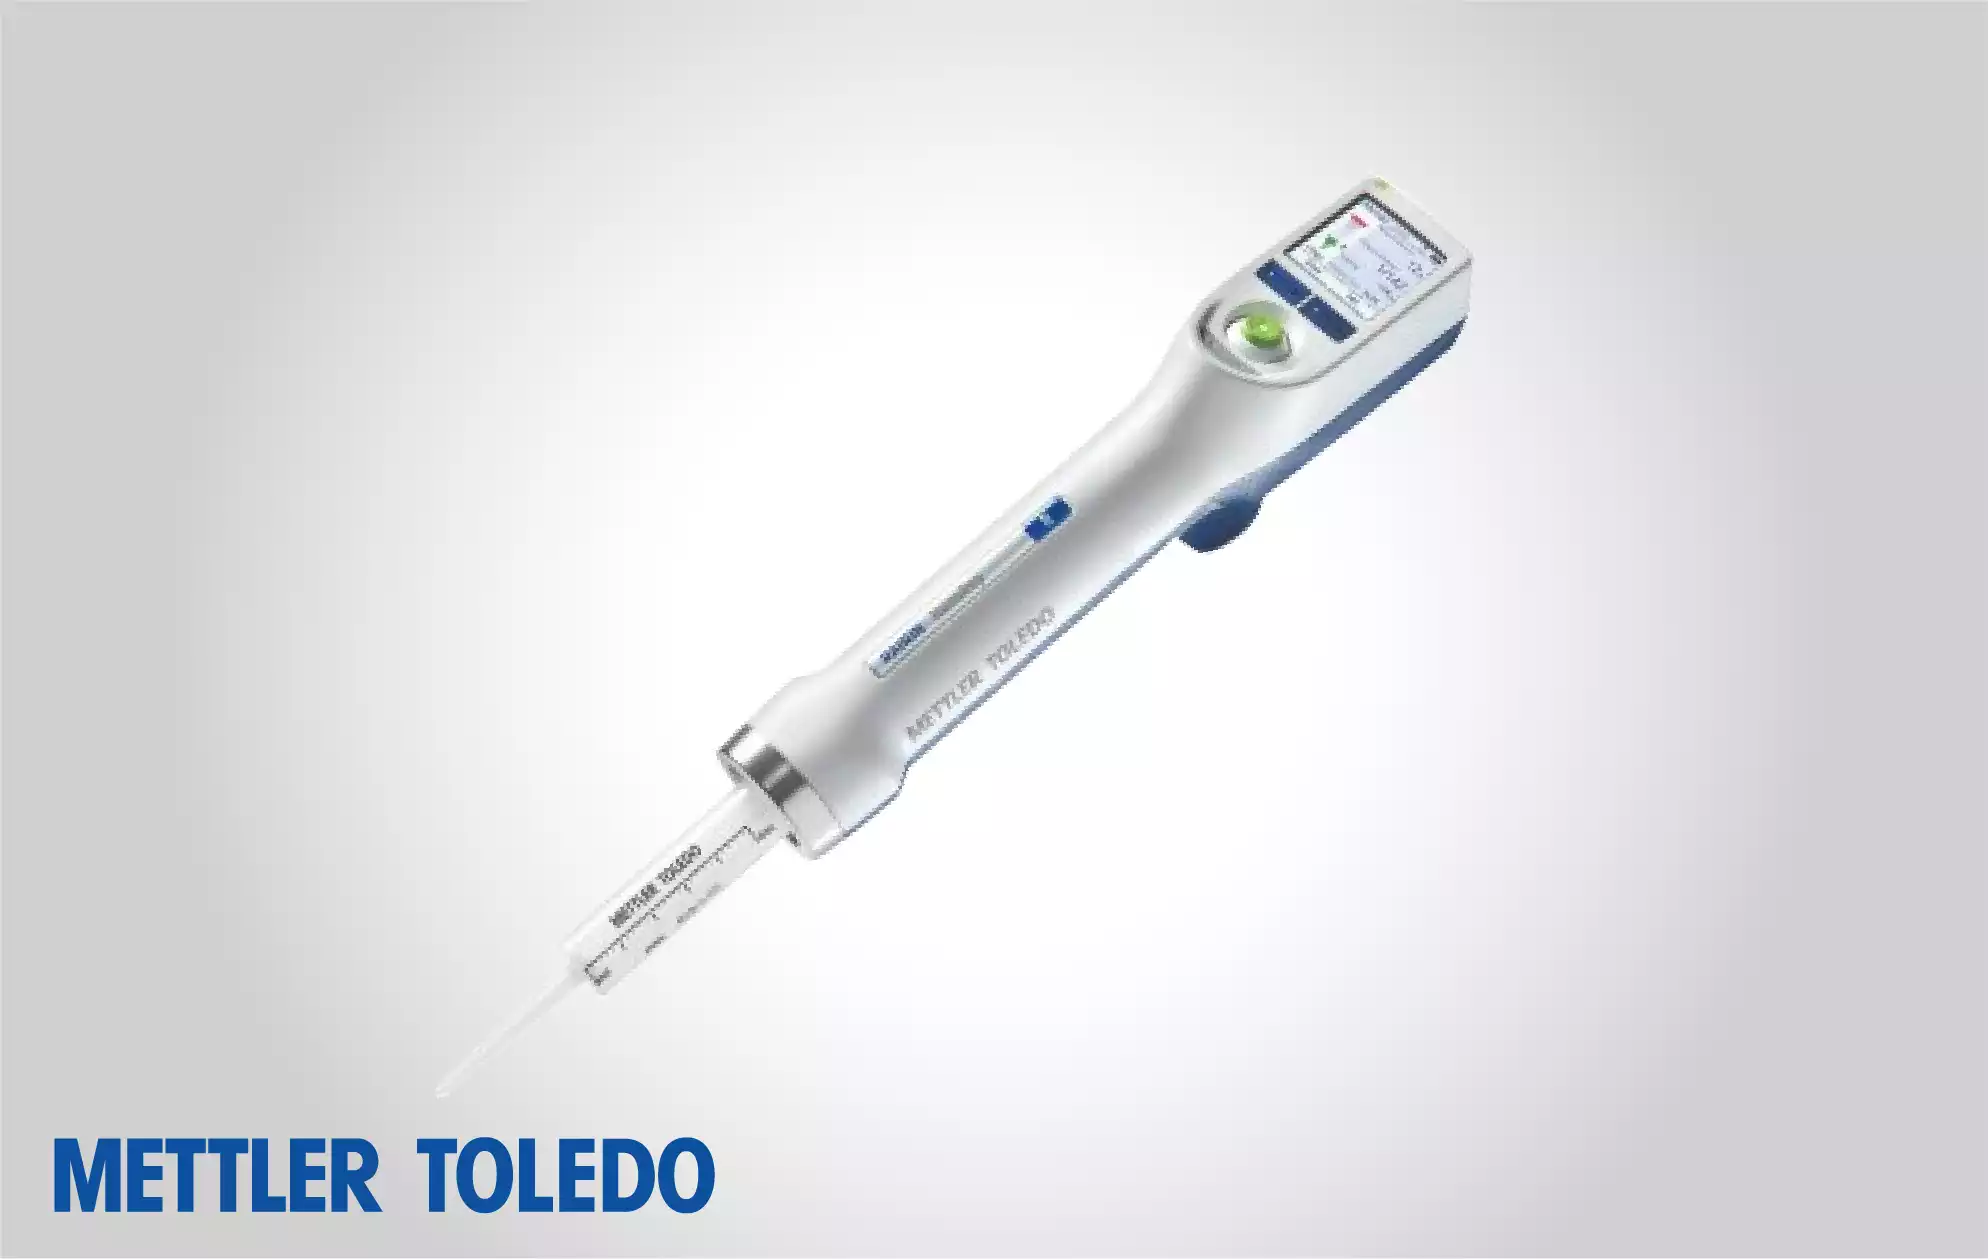 Electronic Repeater Pipette